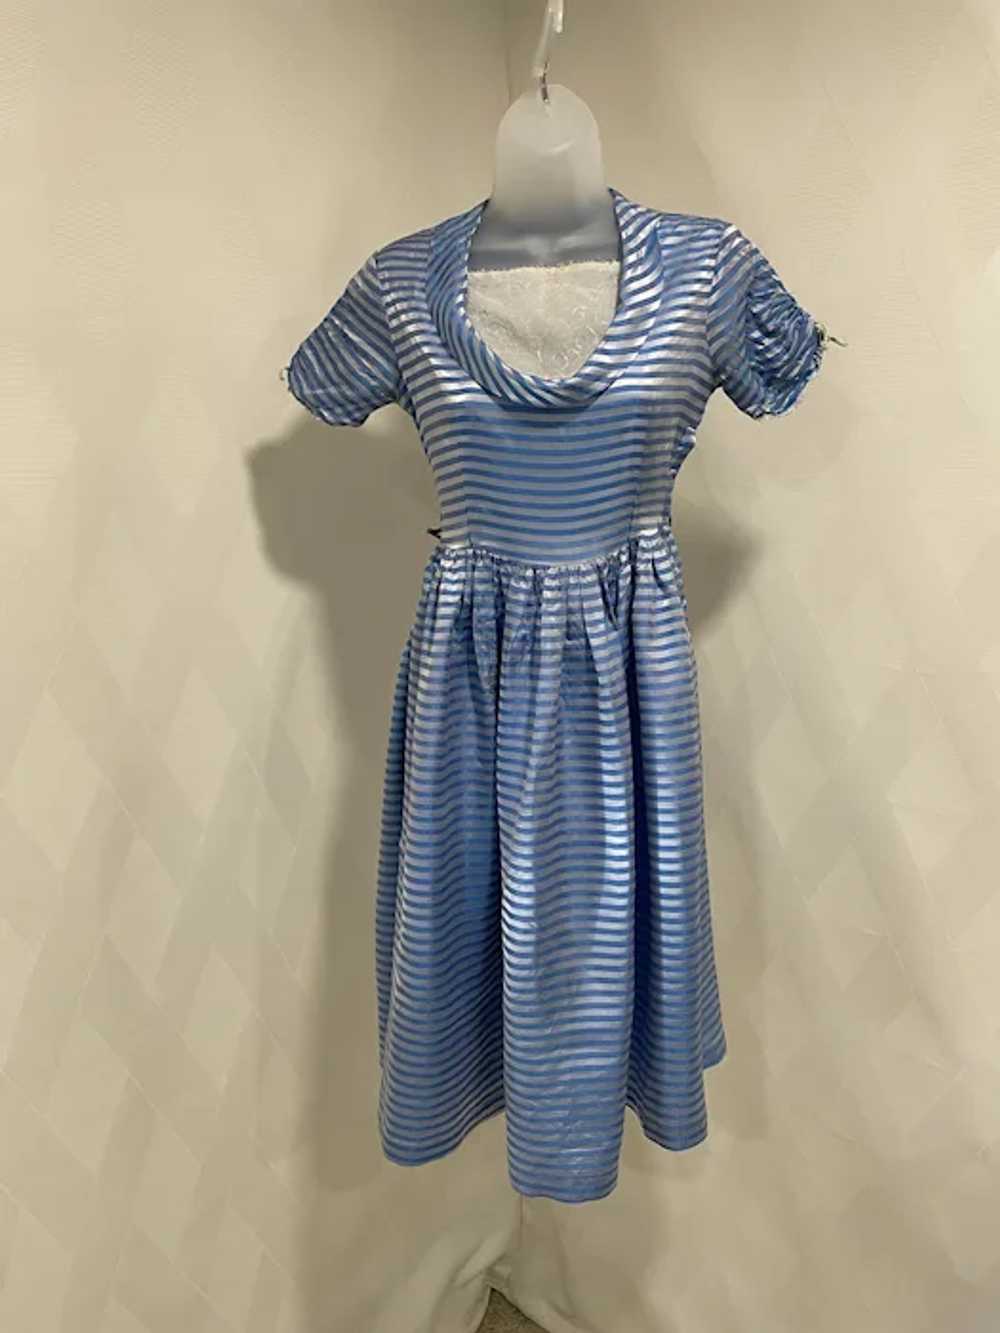 Vintage 1950s Blue and Silver Striped Dress - image 3